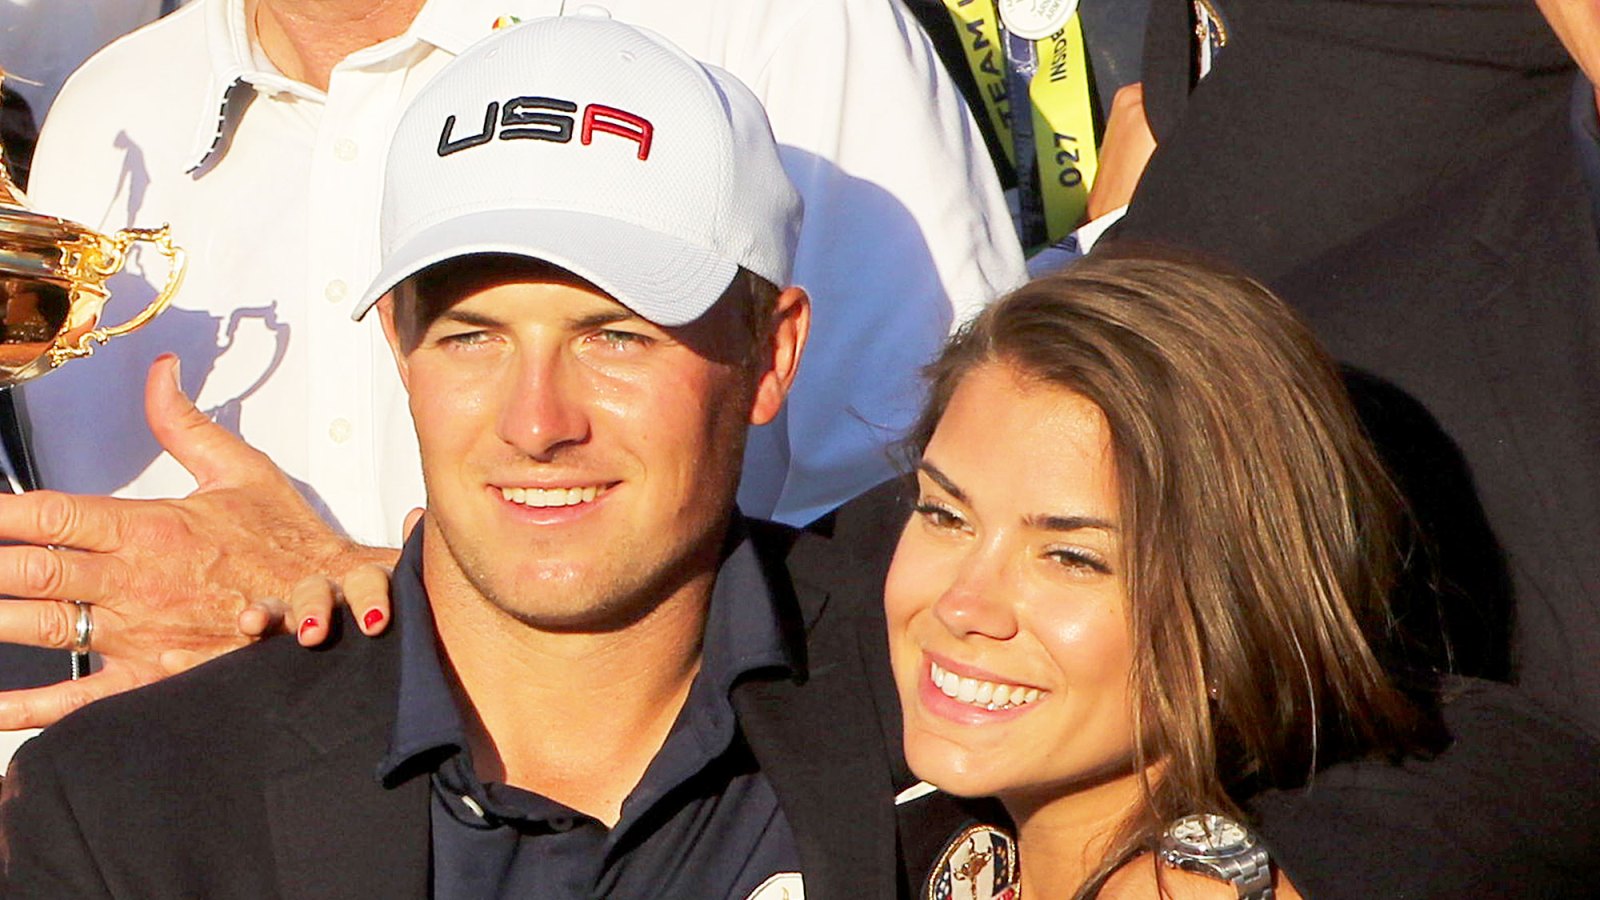 Jordan Spieth and Annie Verret celebrate with the Ryder Cup after the United States victory in the Ryder Cup tournament at Hazeltine National Golf Club on October 02, 2016 in Chaska, Minnesota.